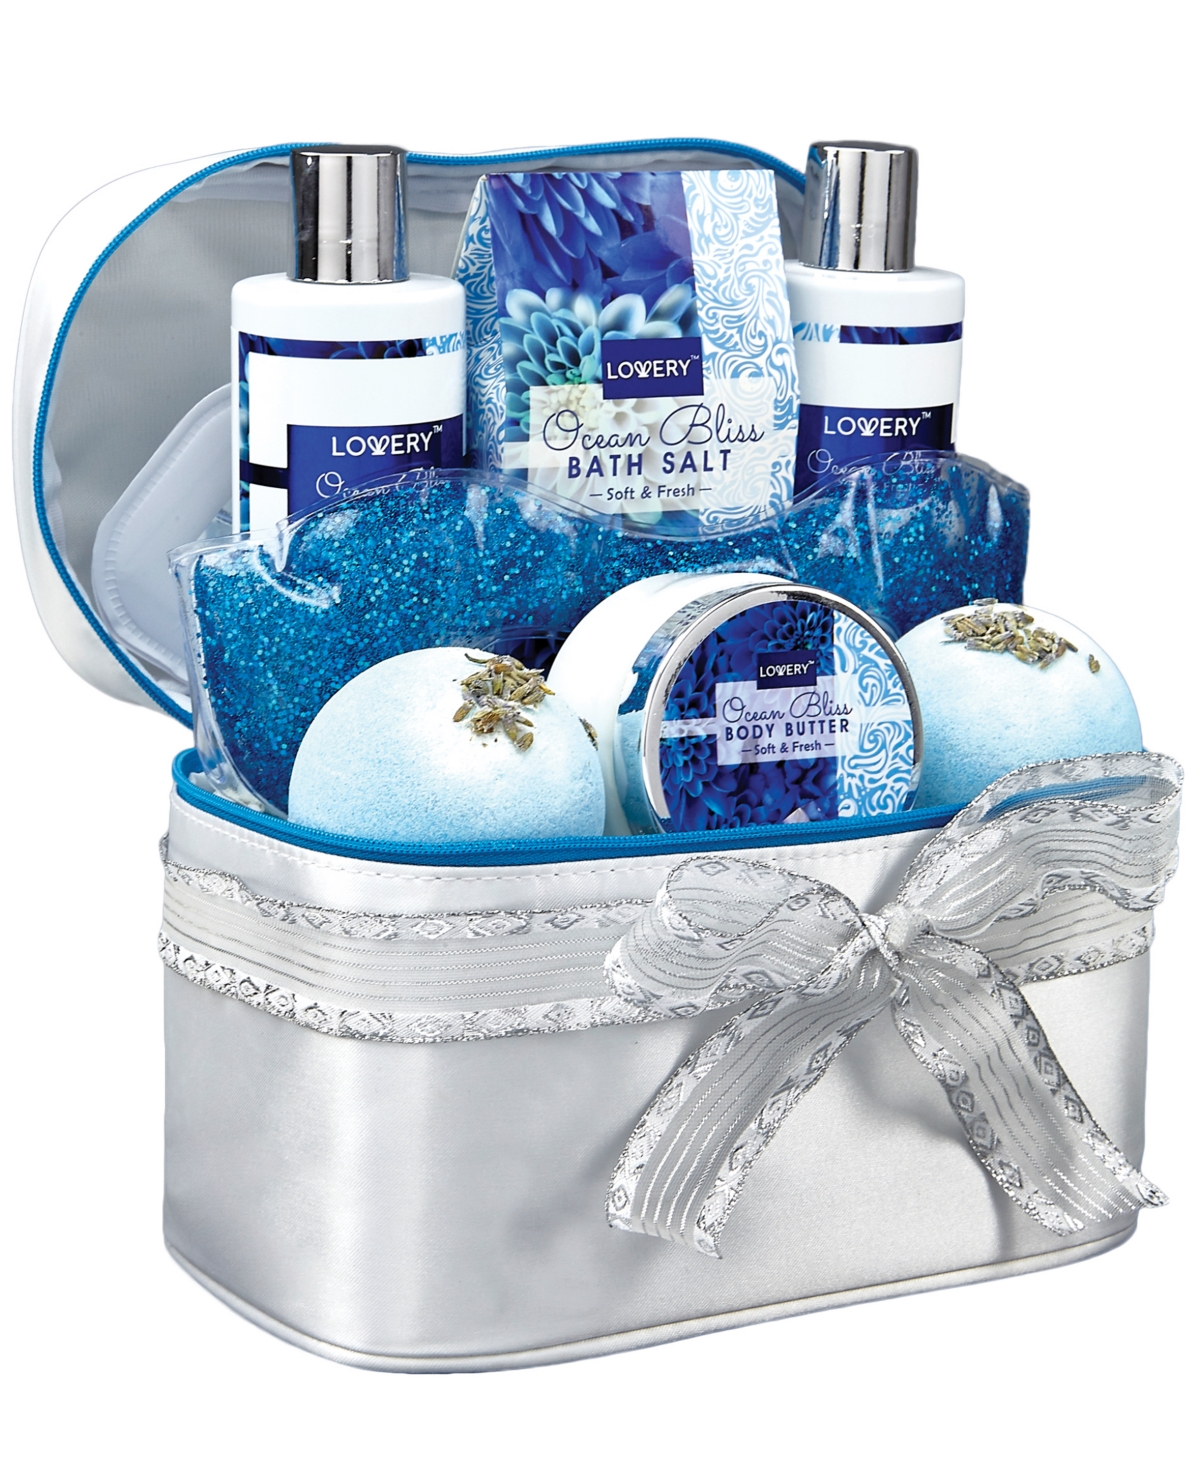 Ocean Bliss Body Care Gift Set, Bath and Shower Essentials with Cosmetic Bag, 9 Piece